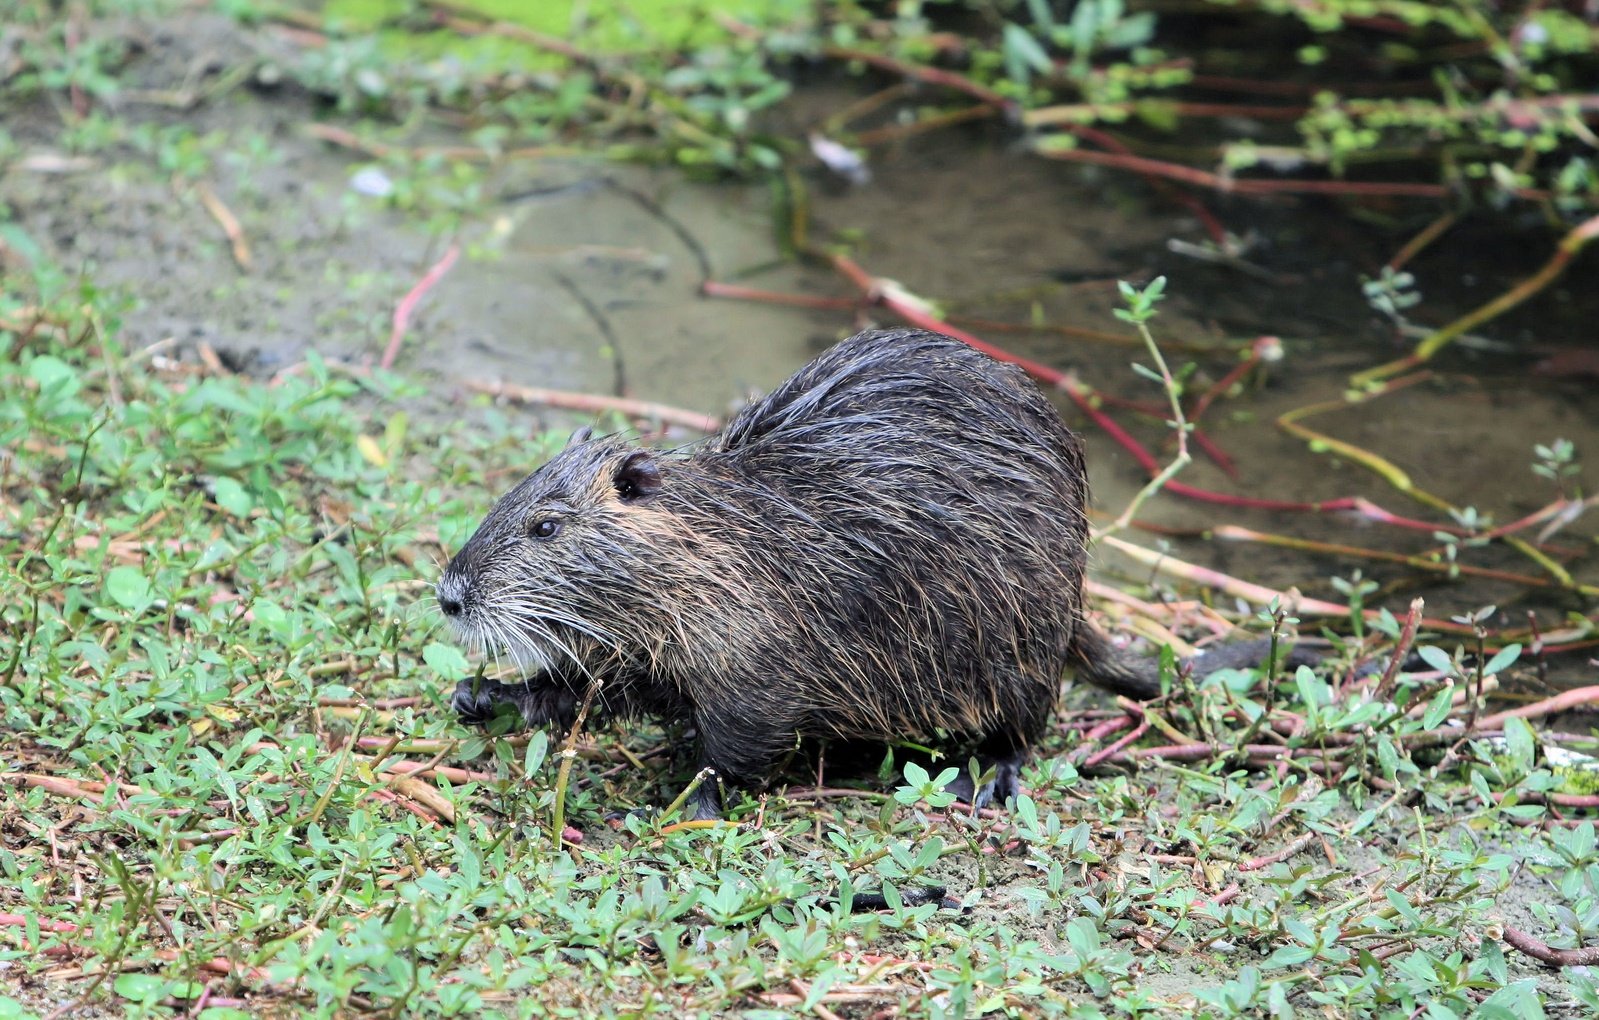 the capybara walks next to the river in the grass